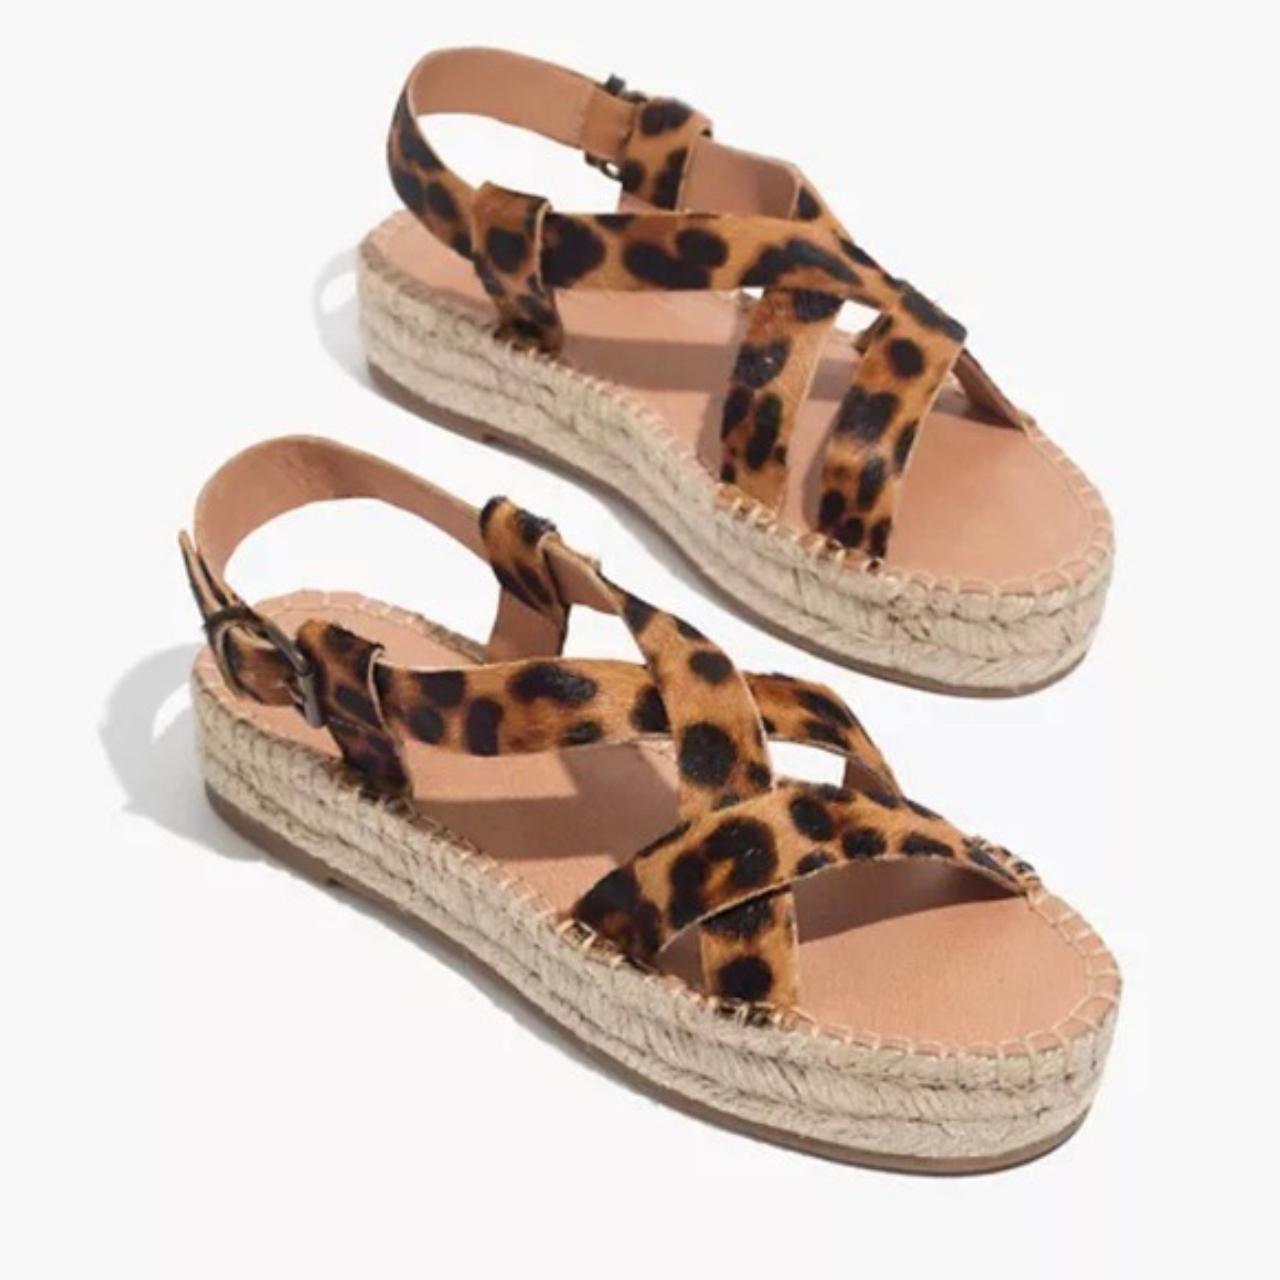 Madewell Women's Black and Brown Sandals